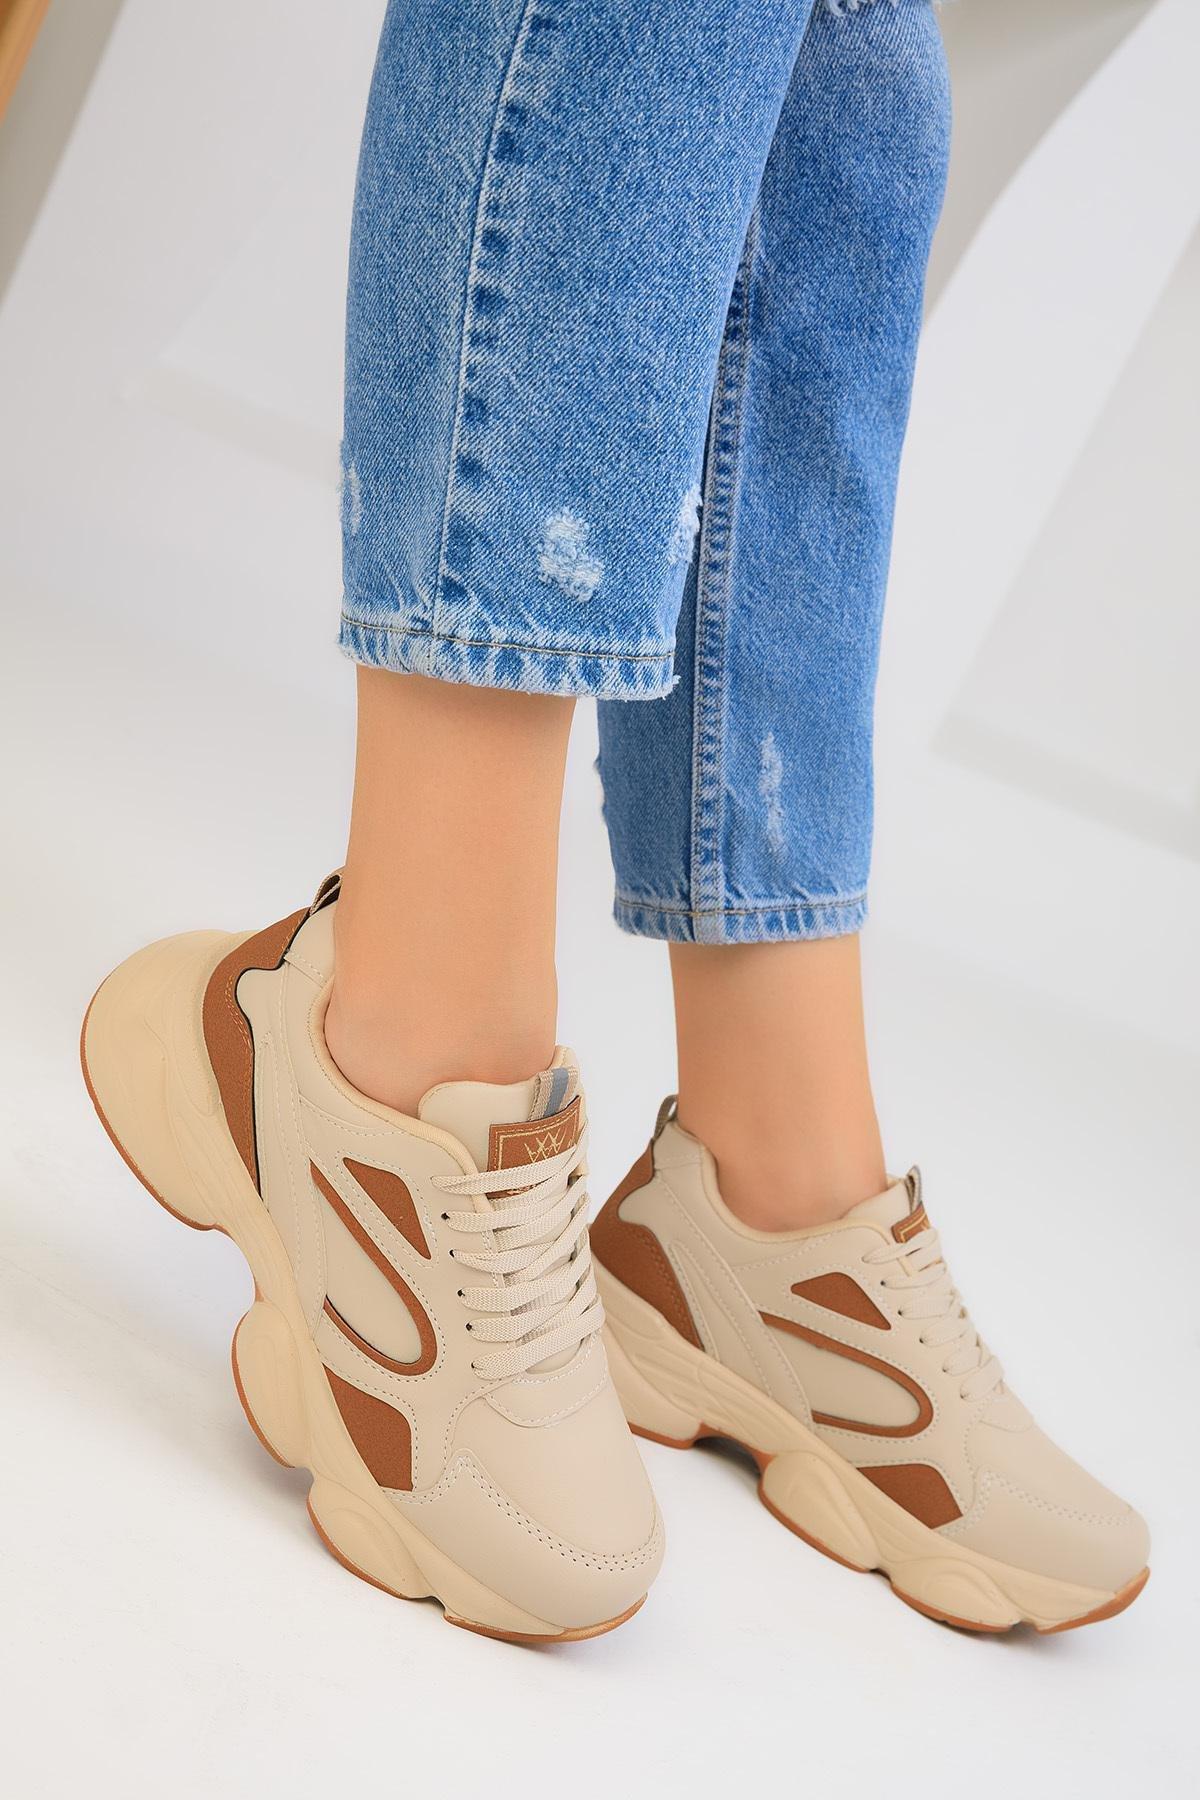 SOHO - Beige Lace-Up Sneakers